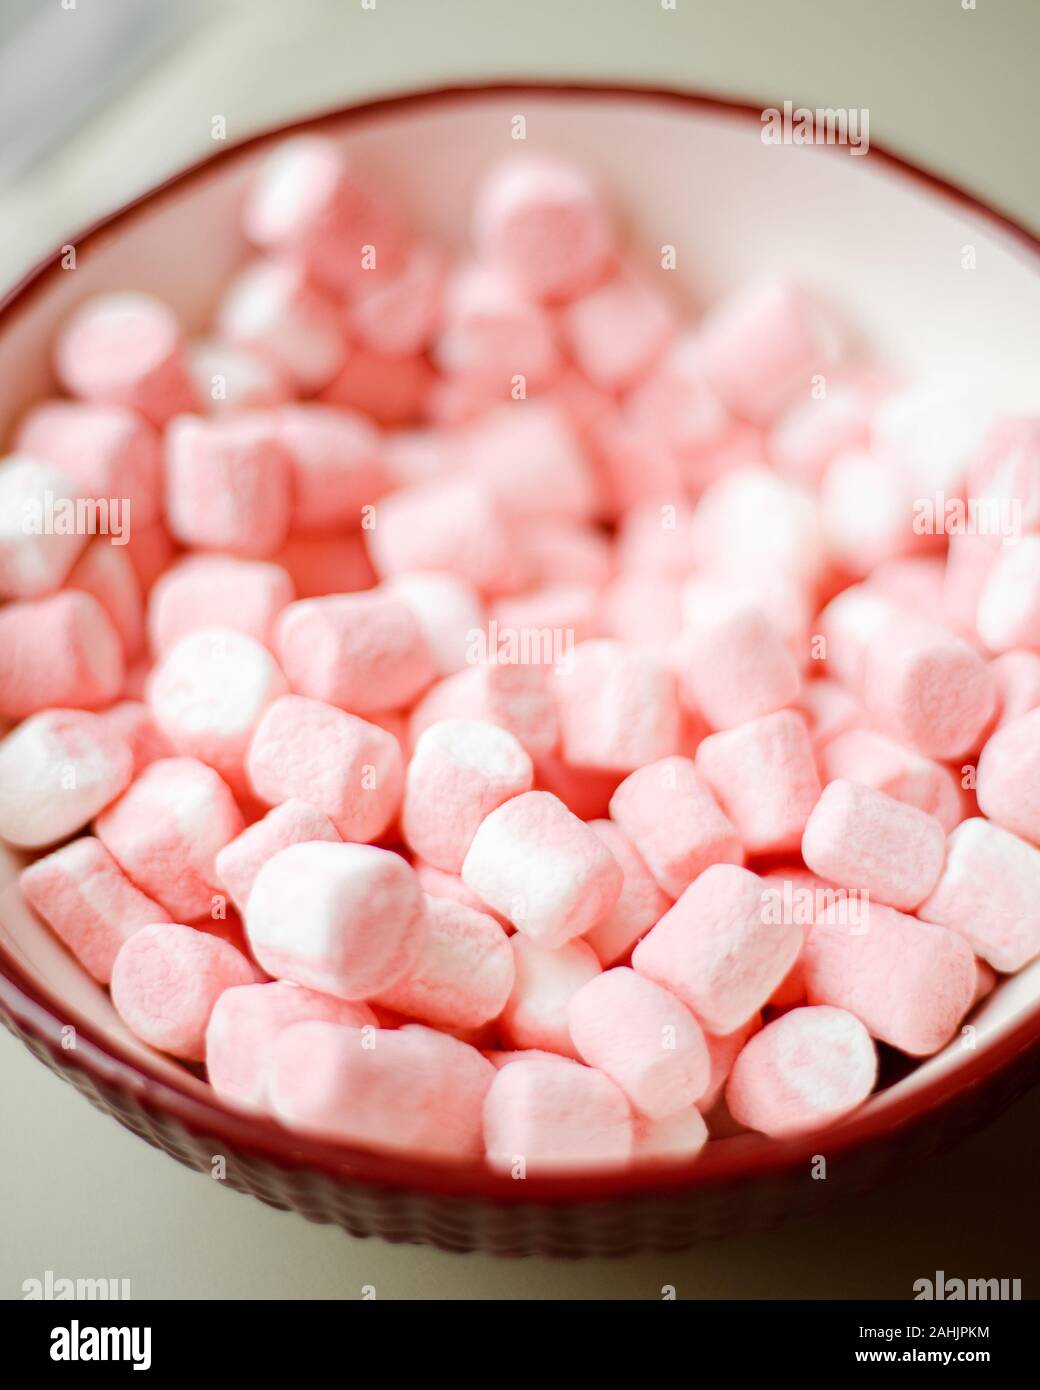 Small Pink and white Marshmallows in Red and White Bowl With Blurry Background/Shallow depth of field Stock Photo